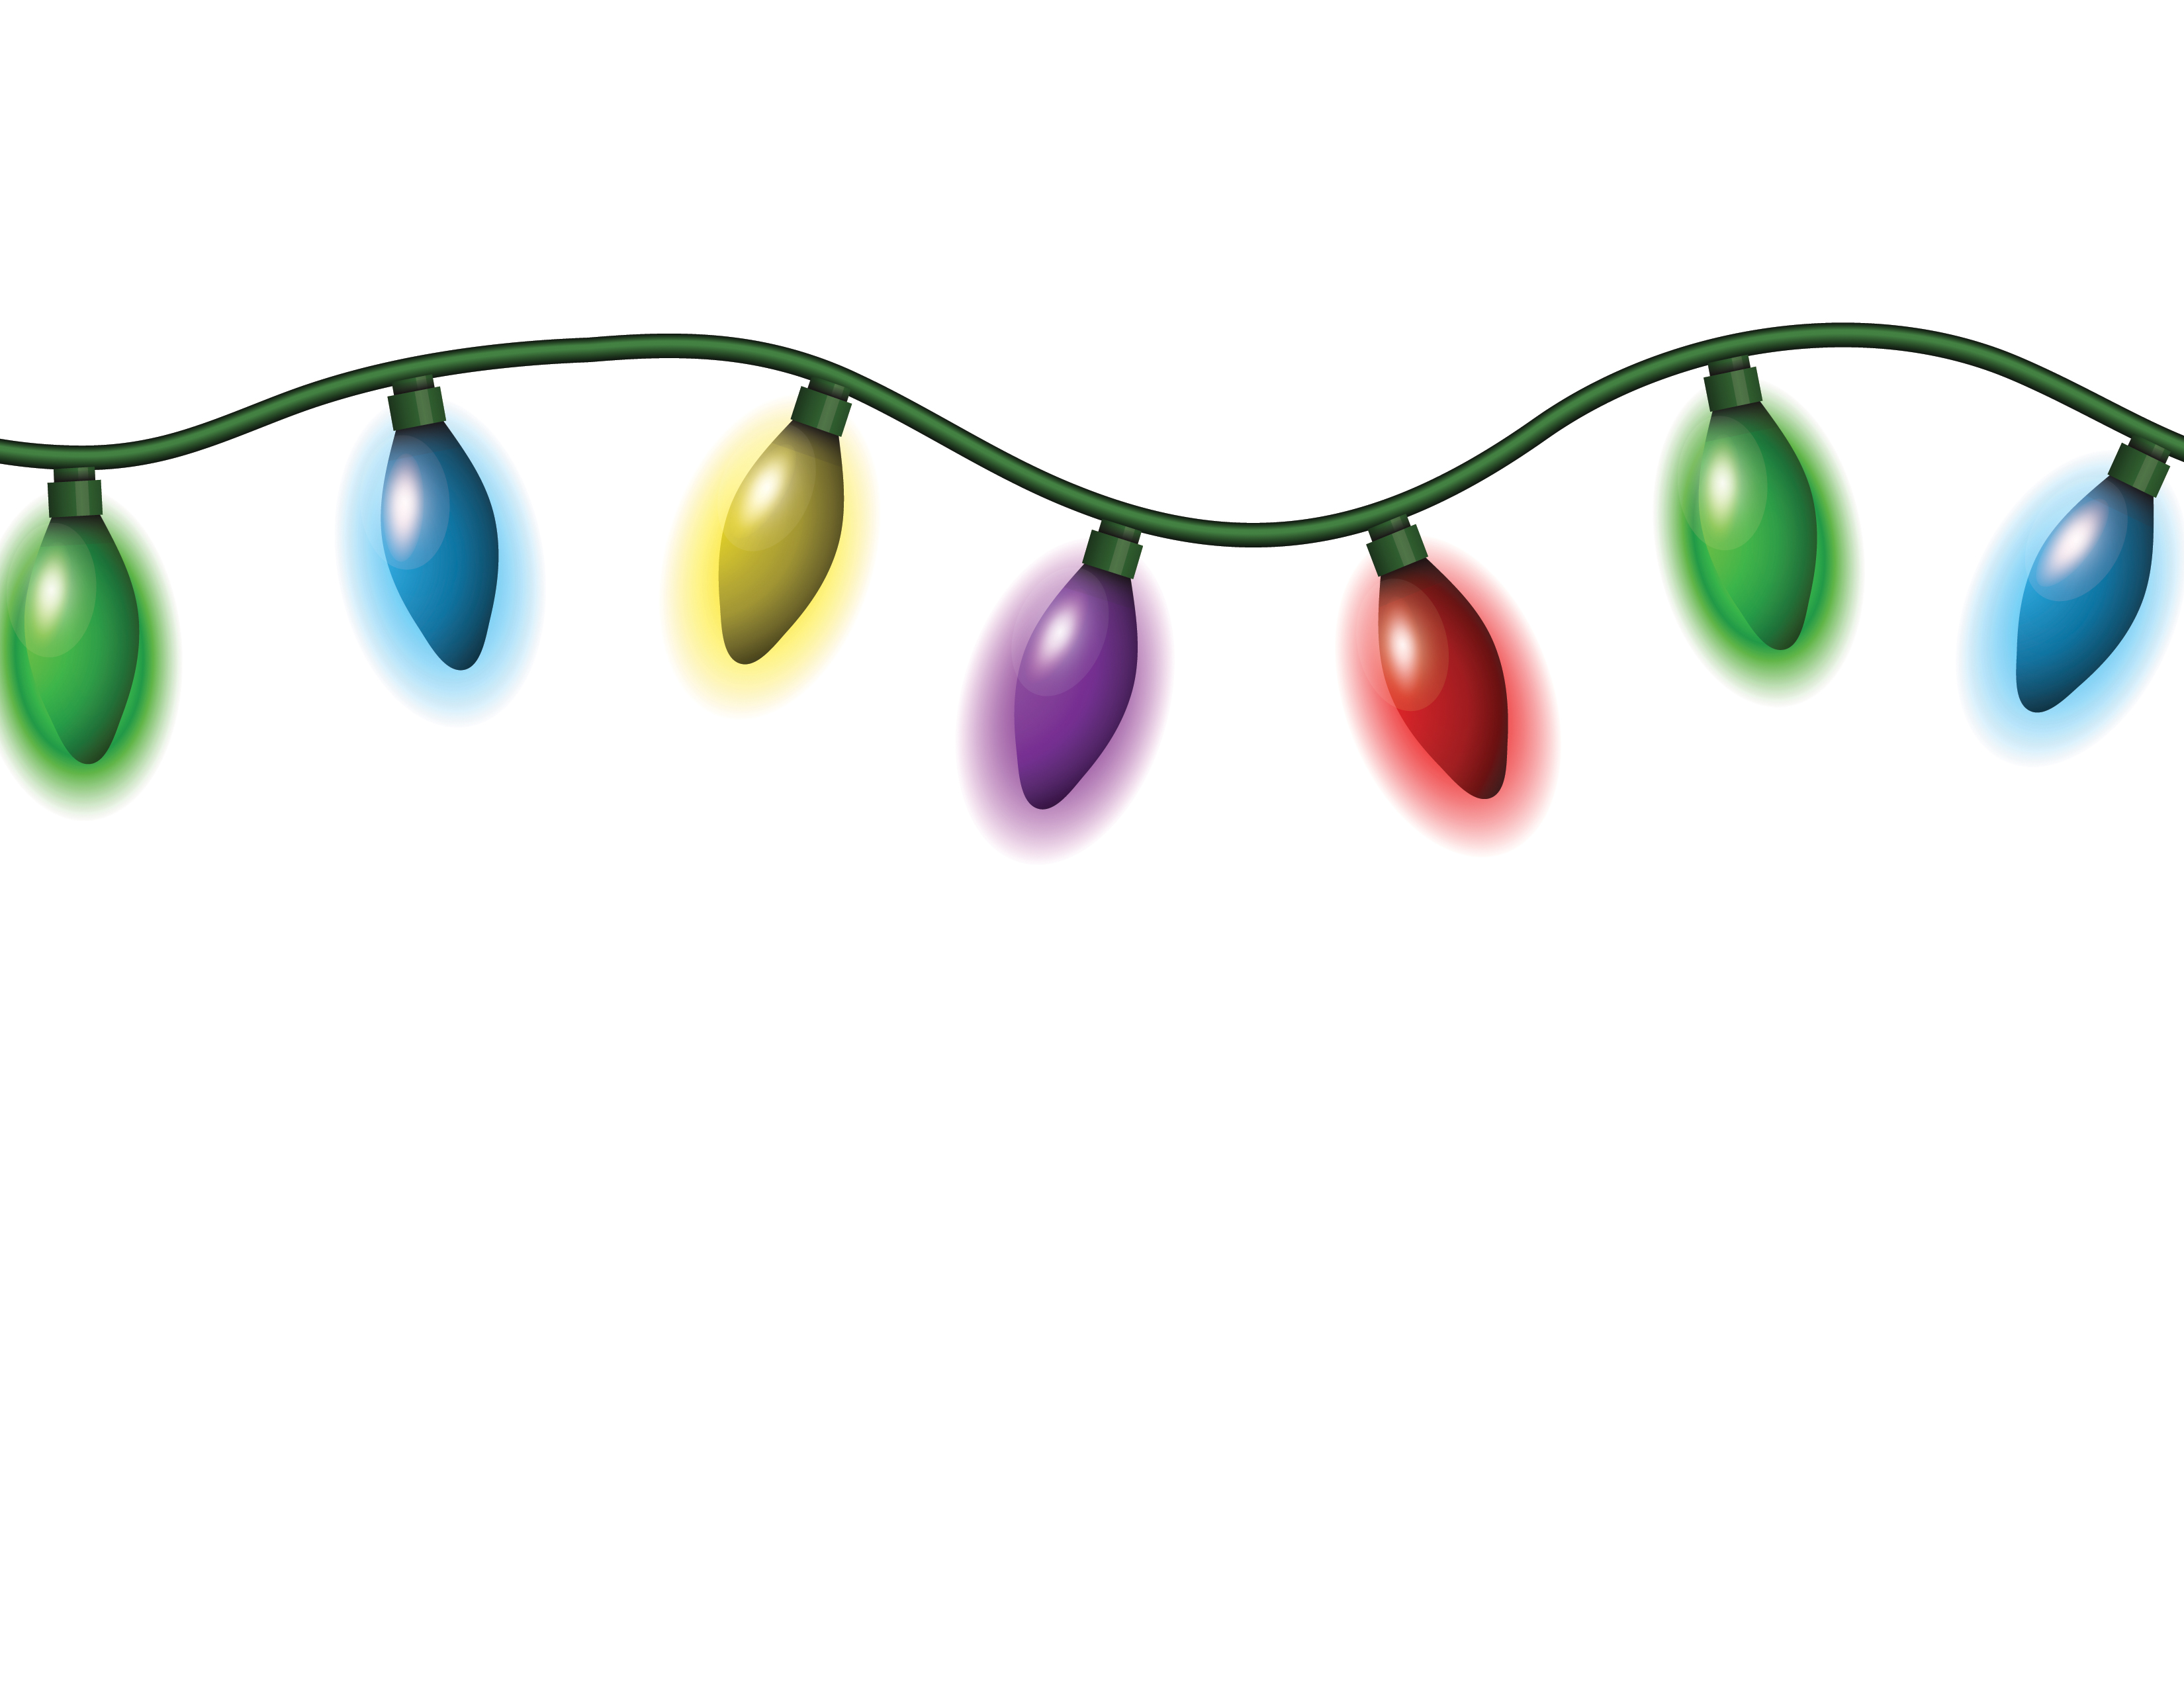 Christmas Lights White Background   10 Cards For  20 00   Size Of